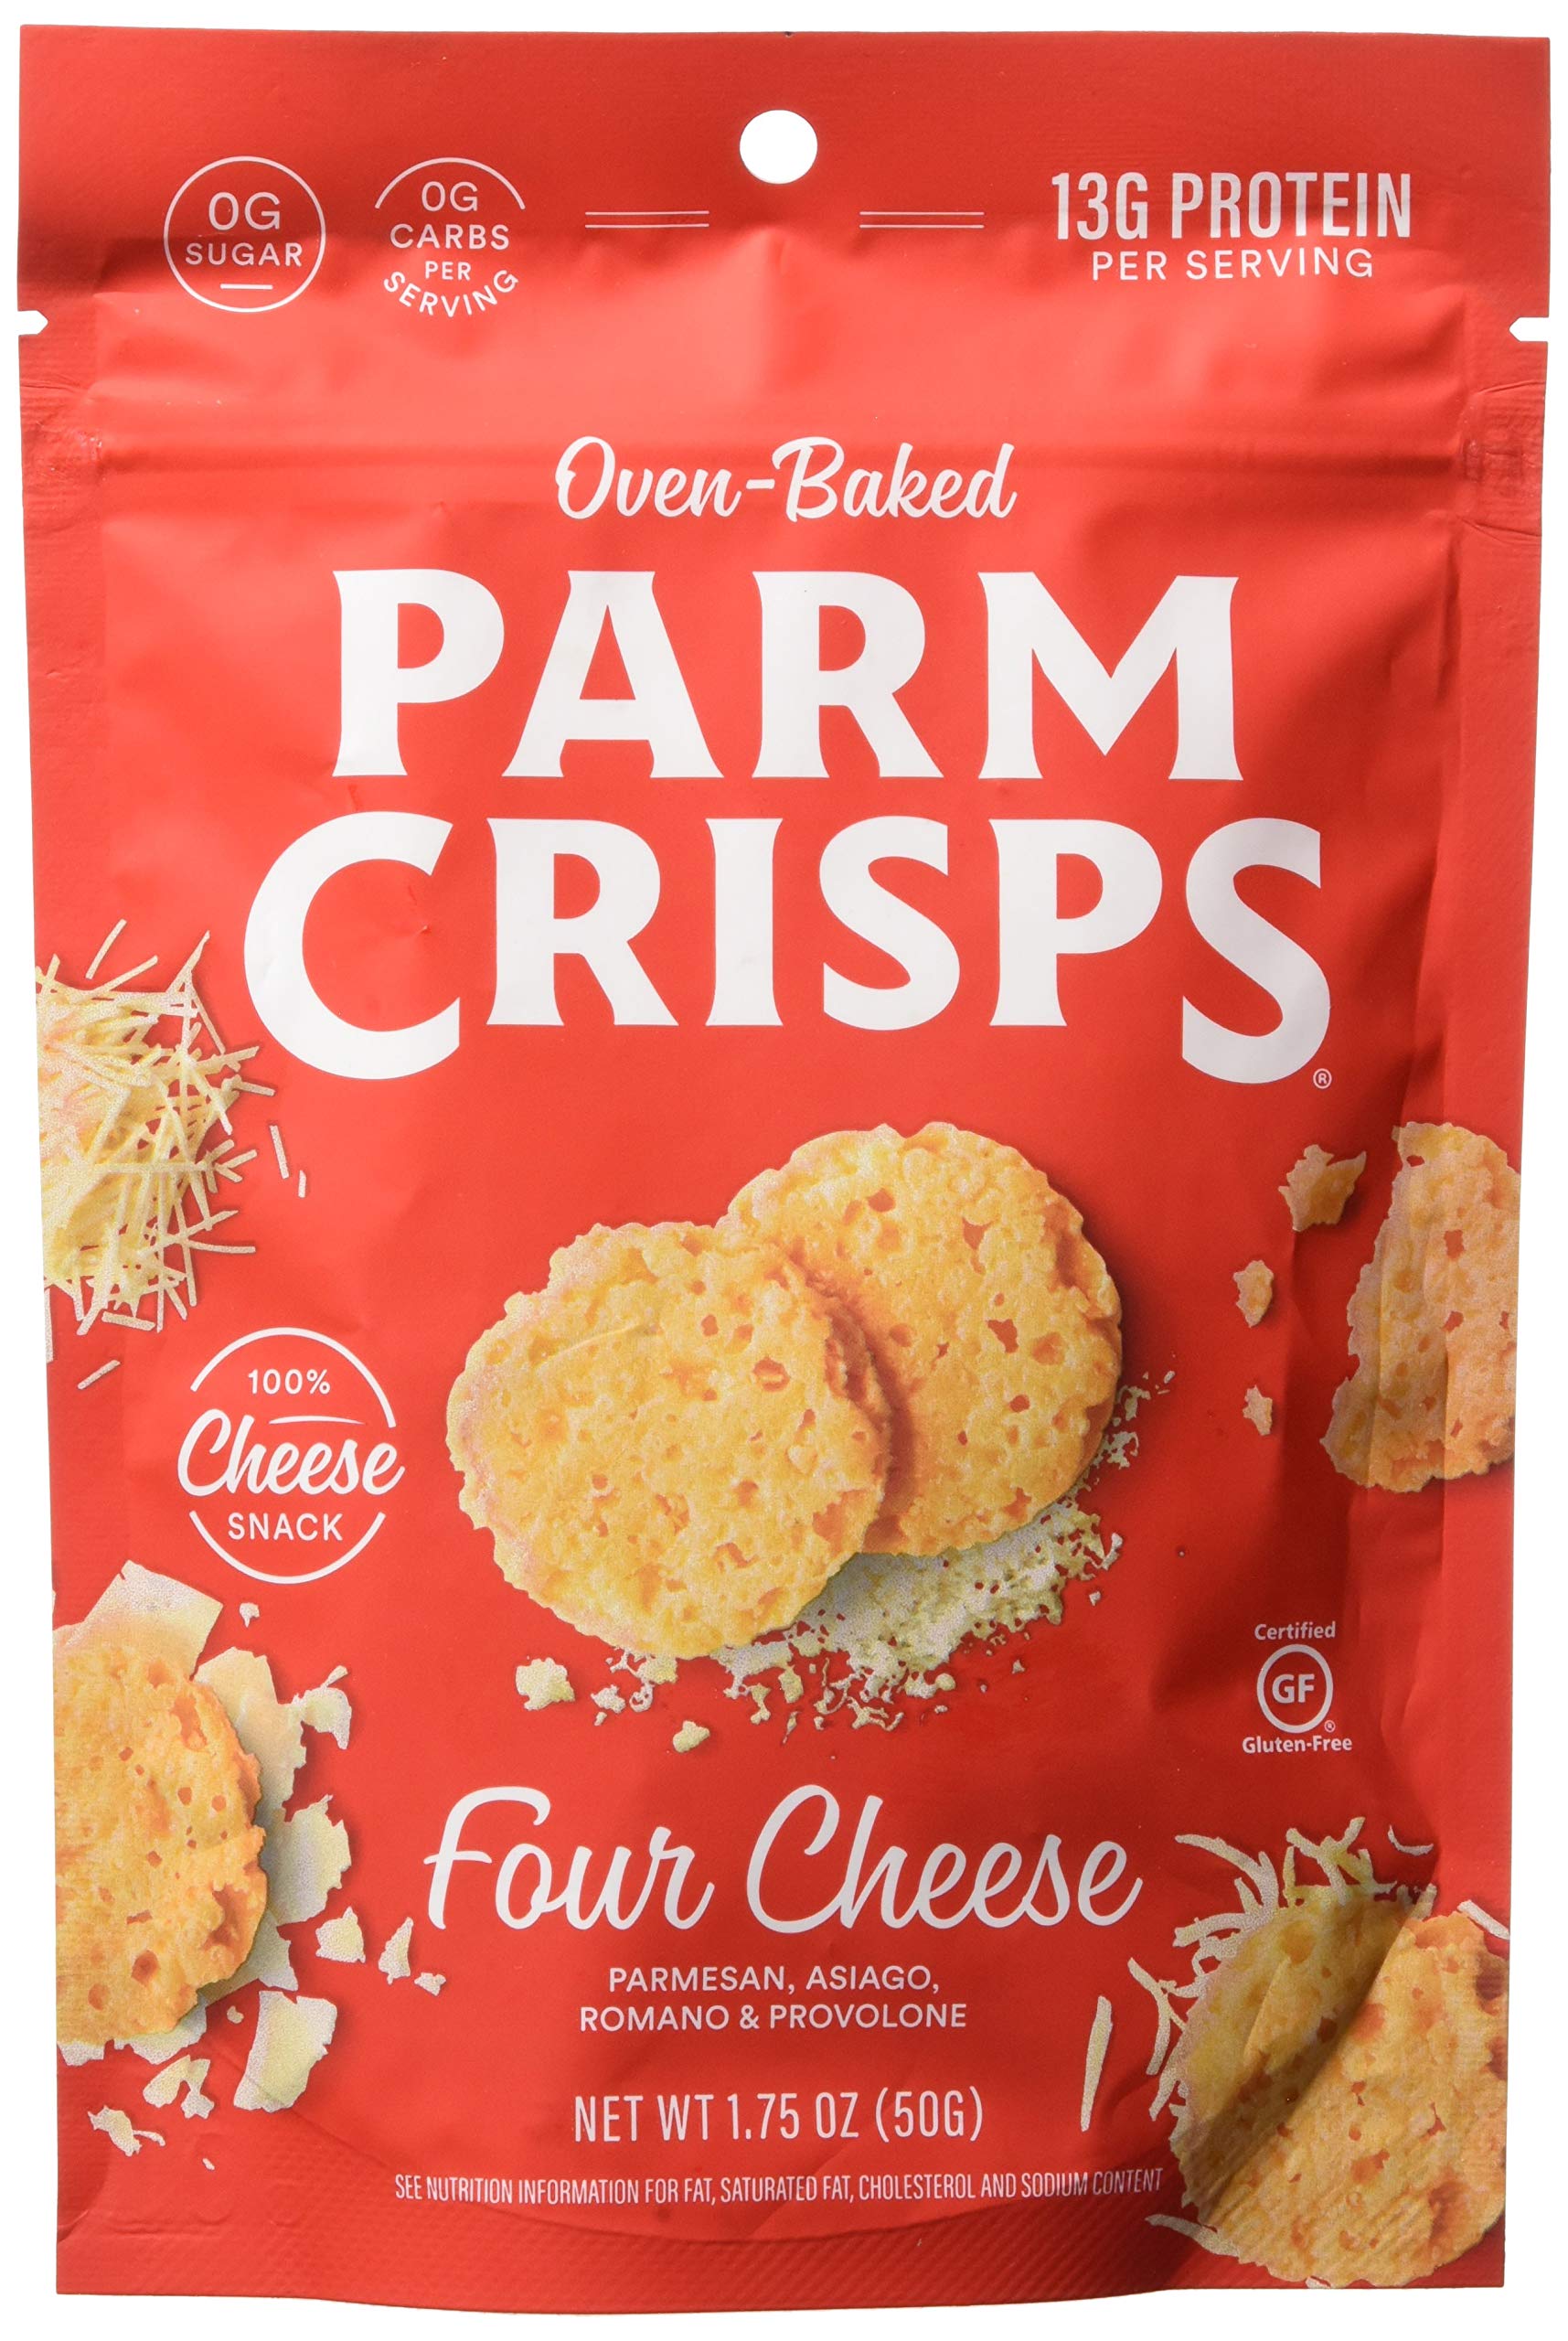 PARMCRISPS Cheddar Cheese Crisps-Pack of 12, 1.75 Oz. Bags-$2.98-Amazon-YMMV